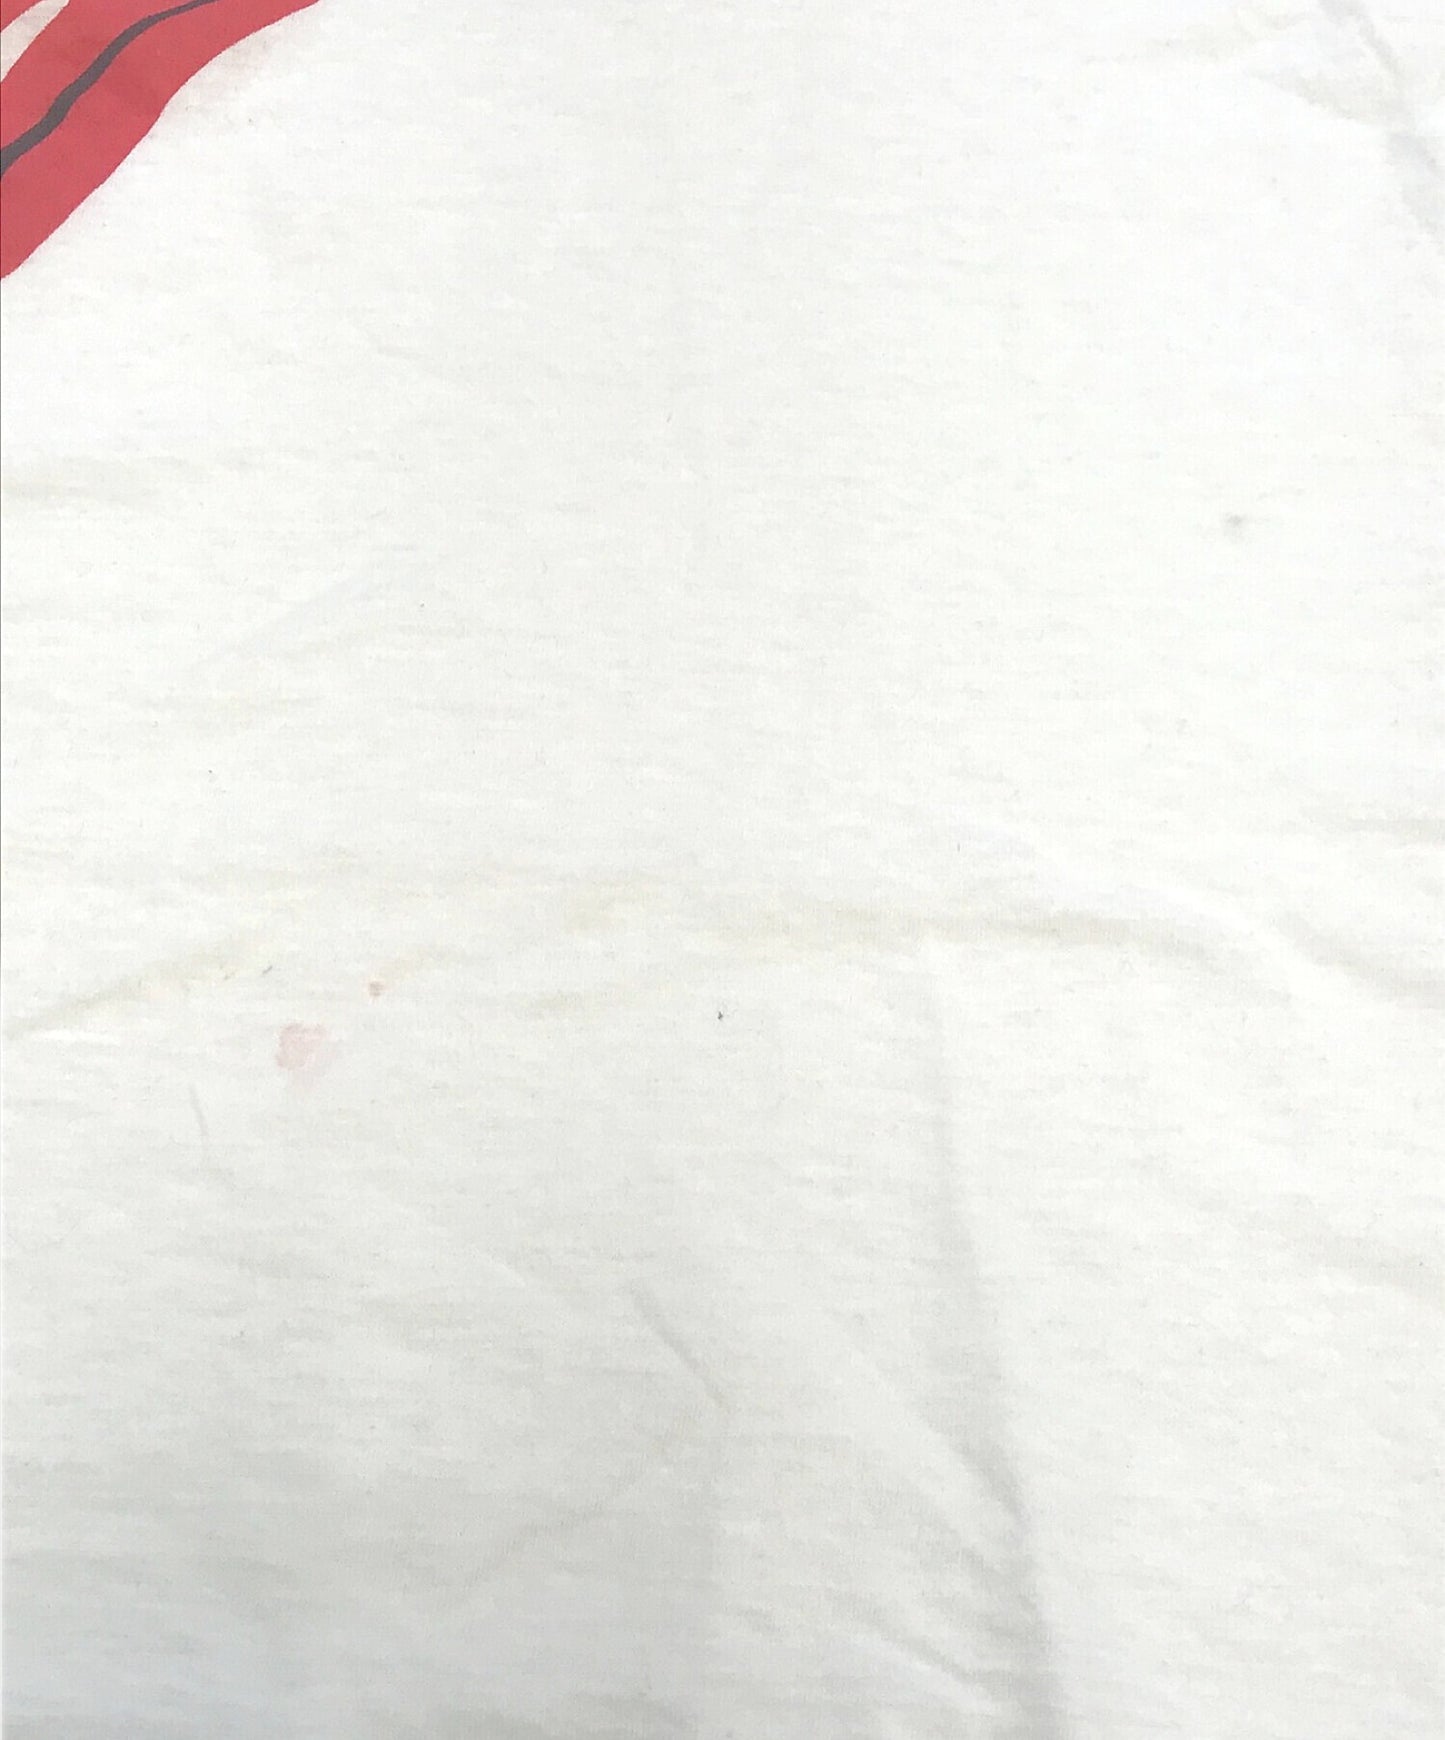 [Pre-owned] ROLLING STONES 80s Band T-Shirt